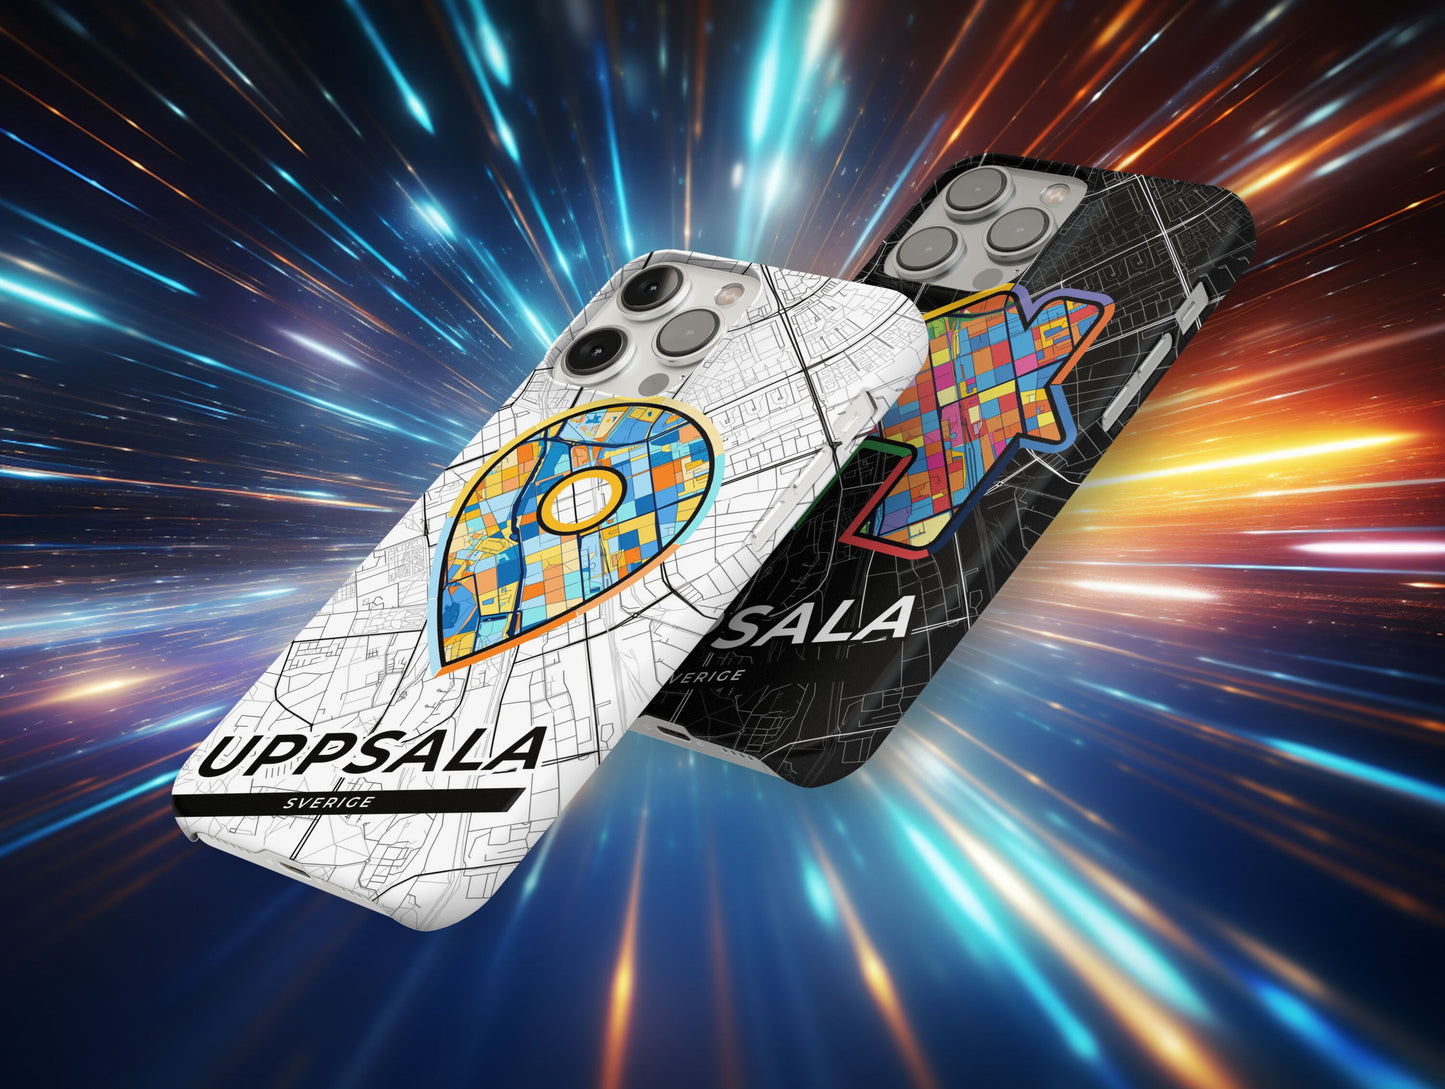 Uppsala Sweden slim phone case with colorful icon